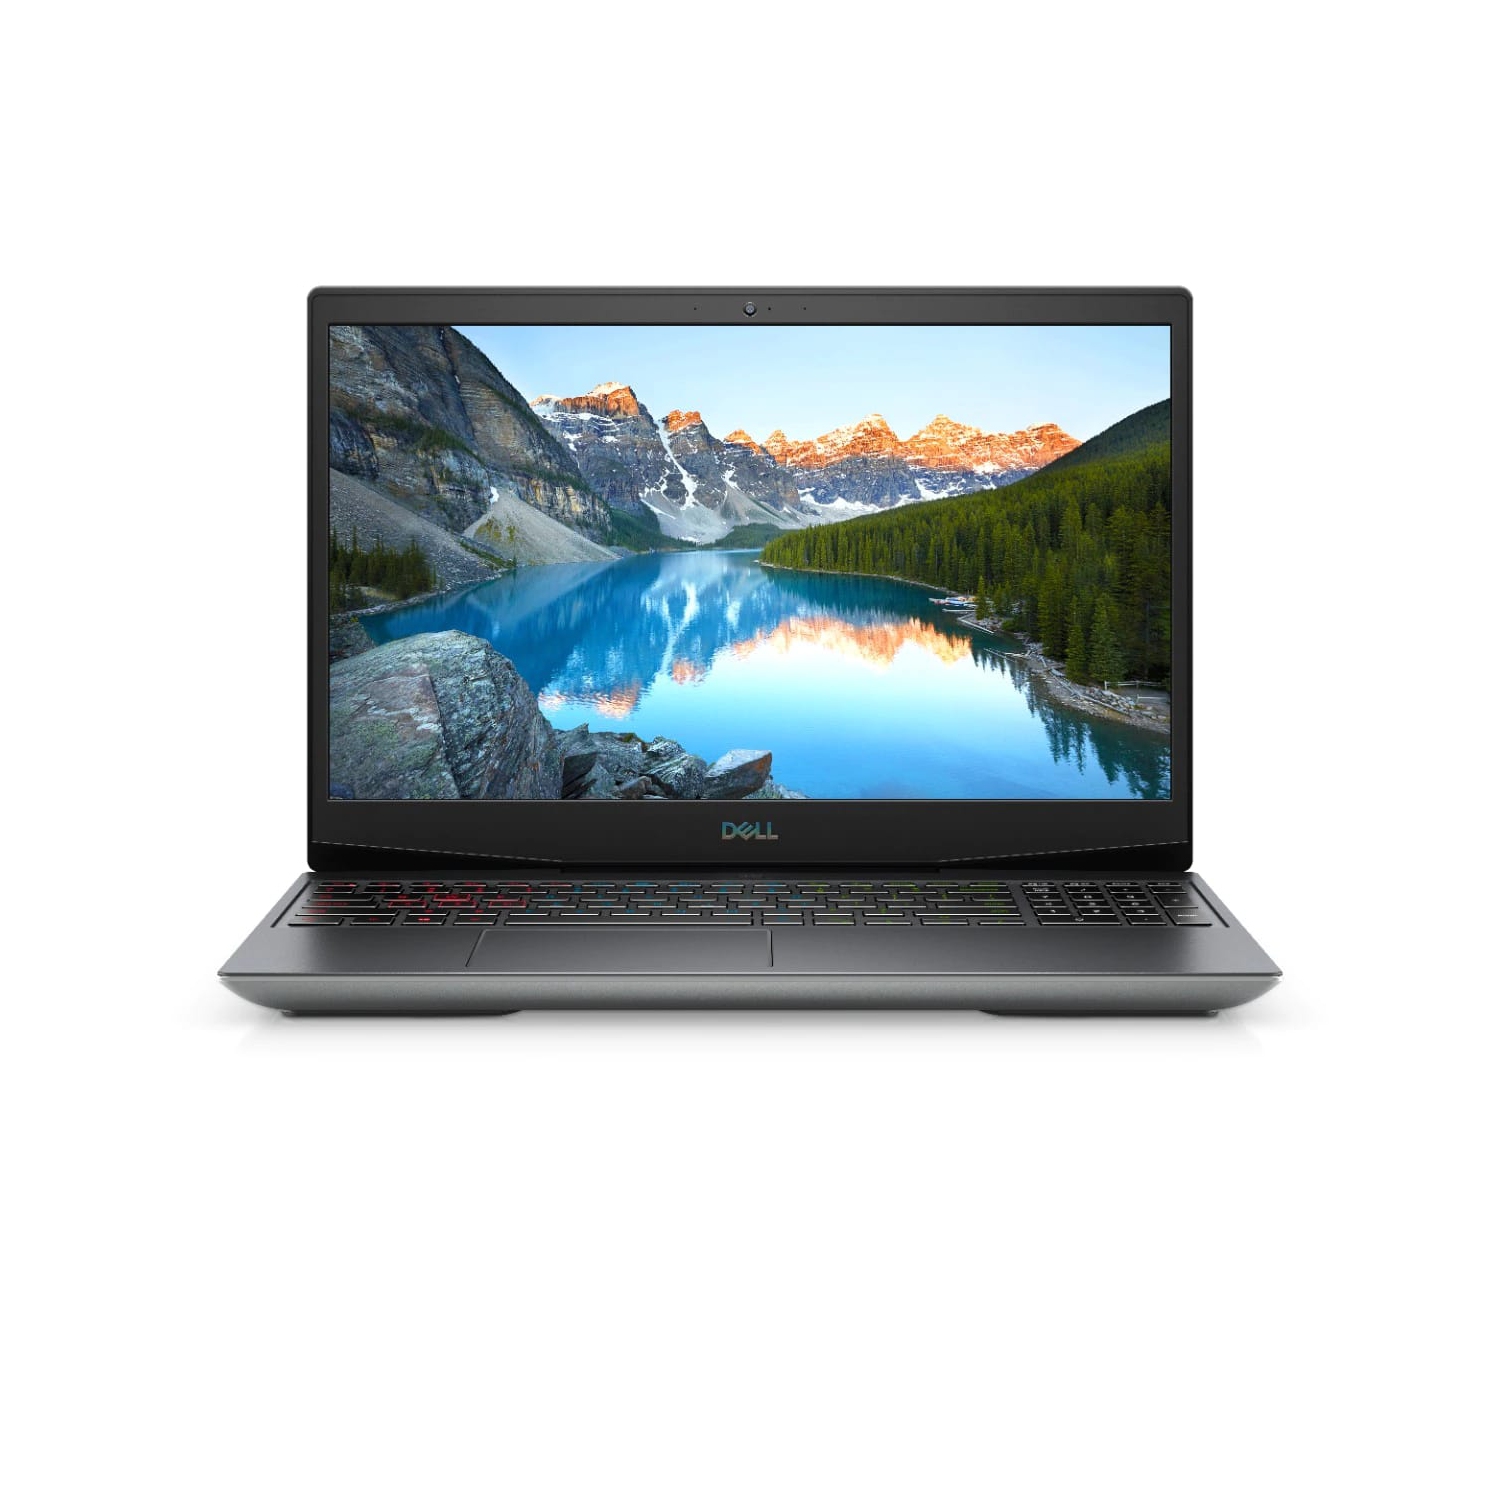 Refurbished (Excellent) - Dell G5 15 5505 Gaming Laptop (2020) | 15.6" FHD | Core Ryzen 7 - 512GB SSD - 16GB RAM - RX 5600 | 8 Cores @ 4.2 GHz Certified Refurbished